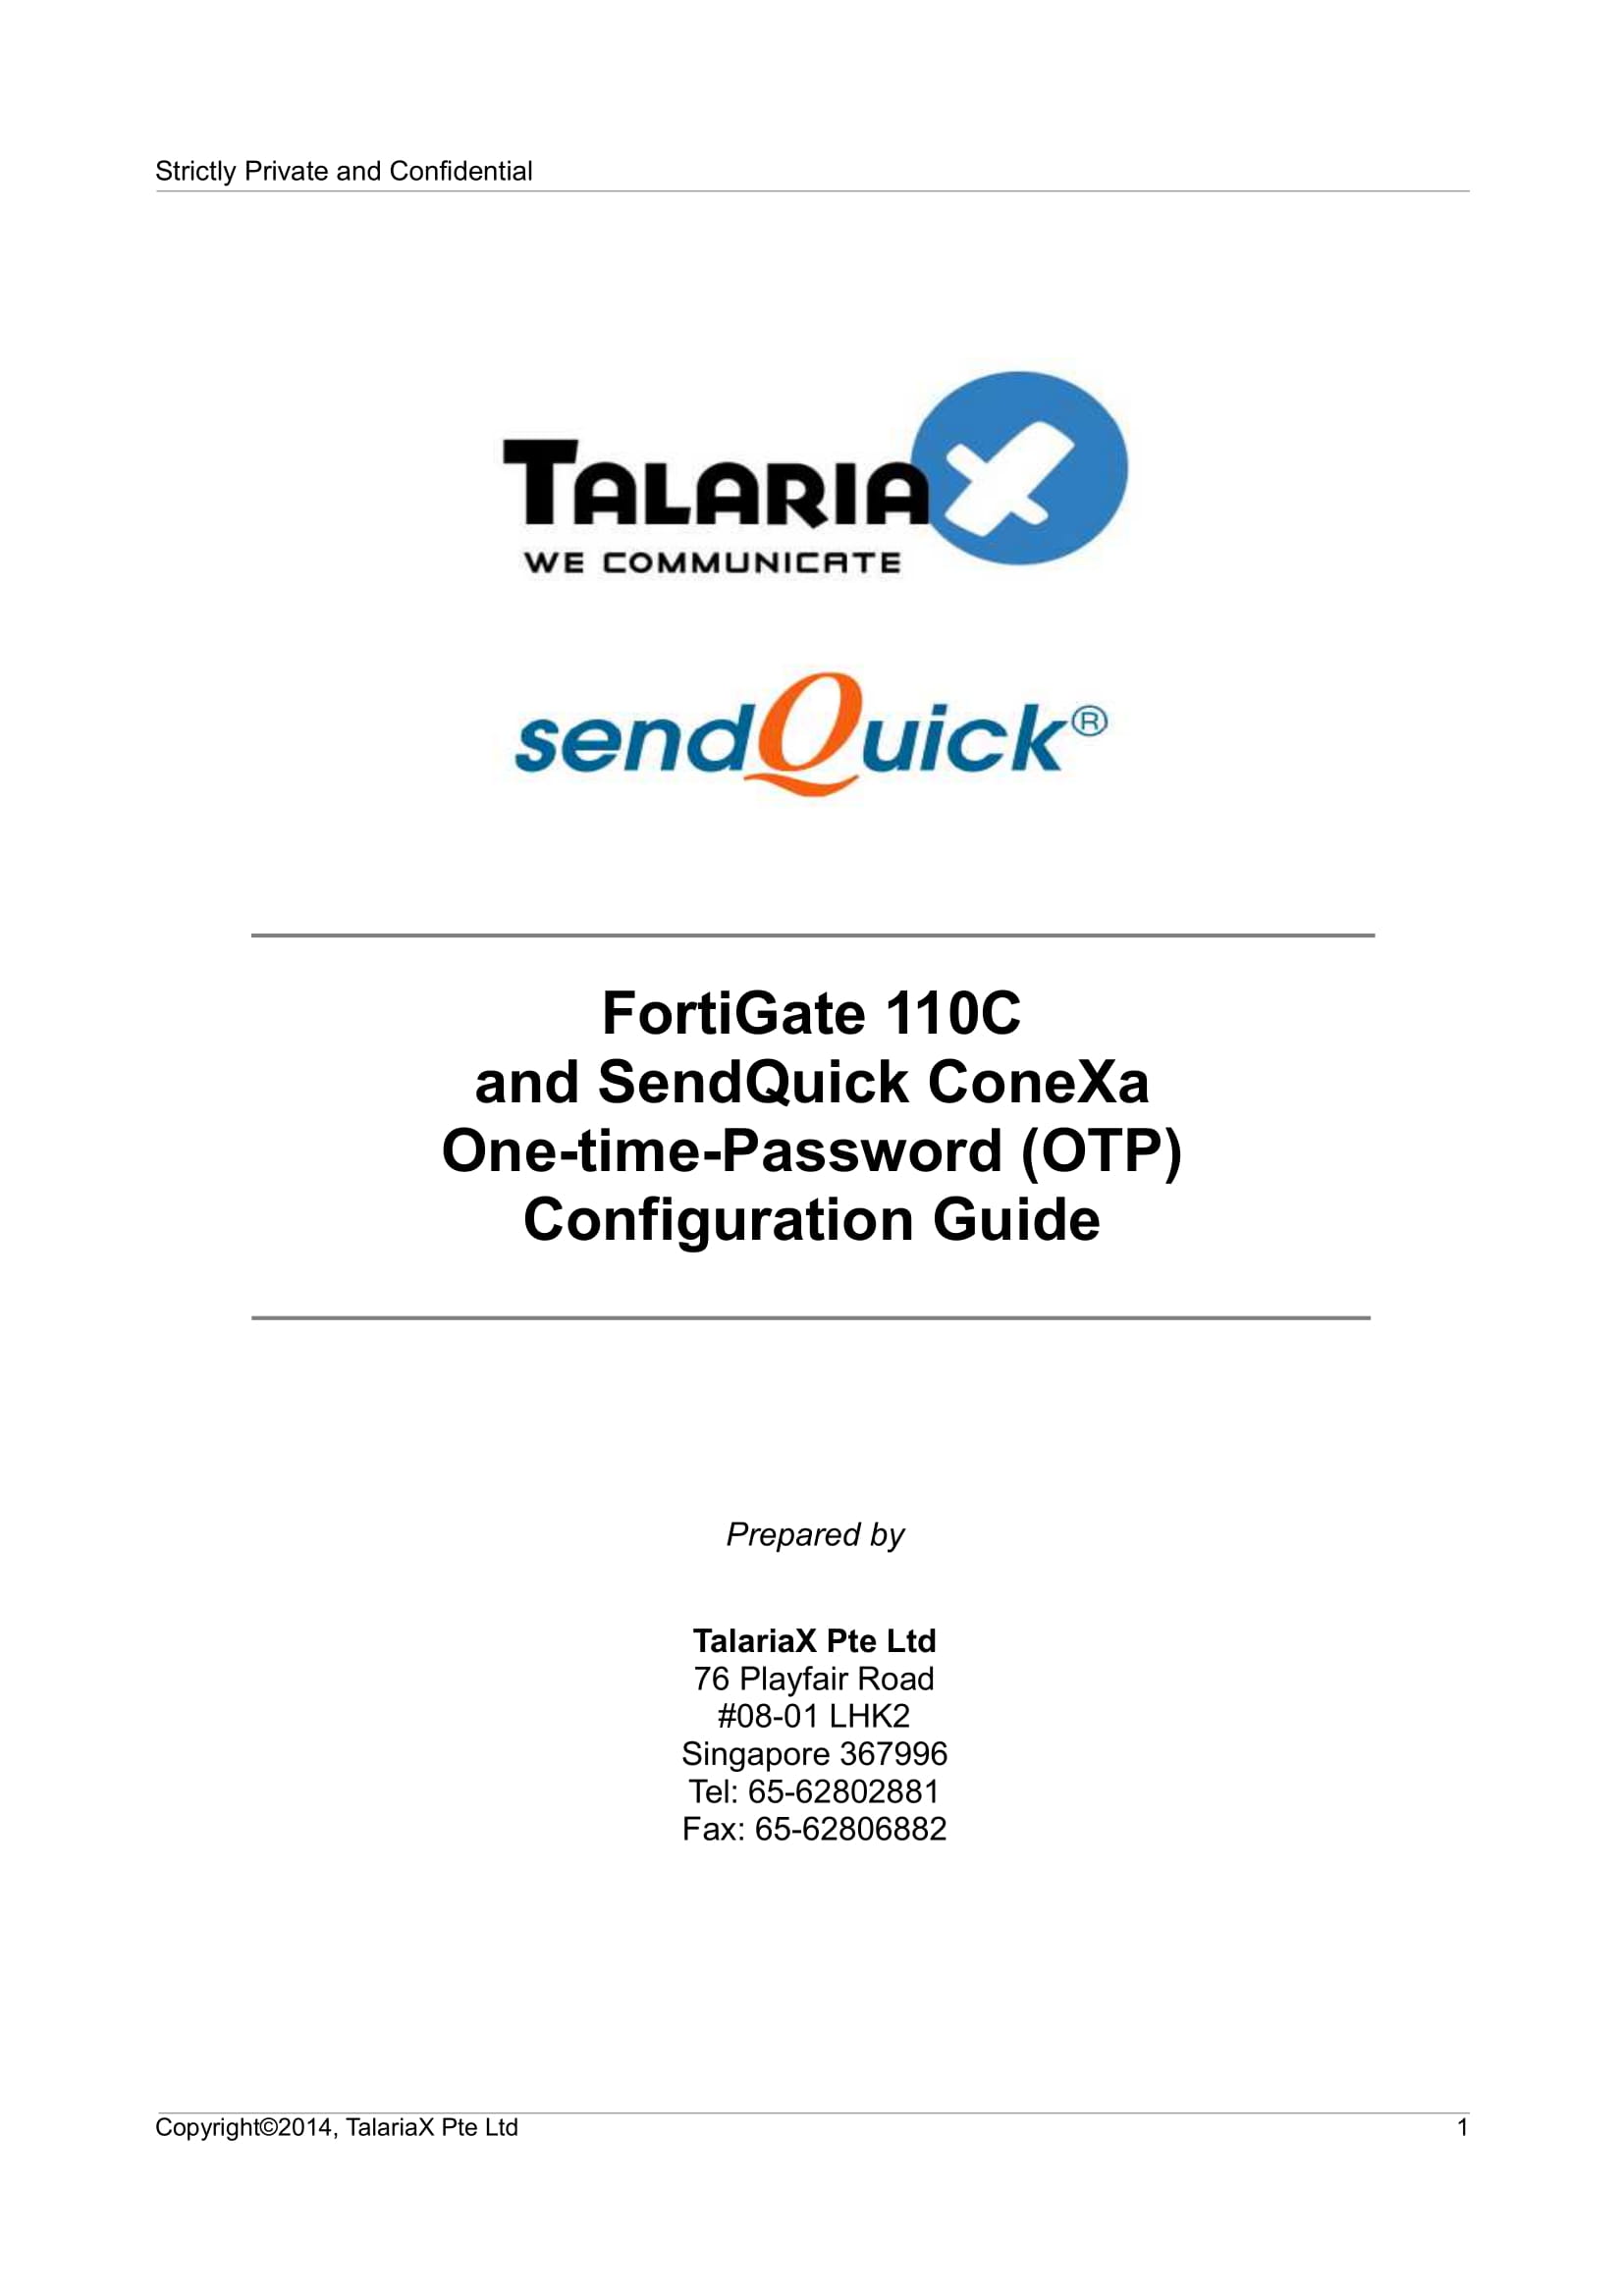 You are currently viewing FortiGate 110C and SendQuick ConeXa One-time-Password (OTP) Configuration Guide